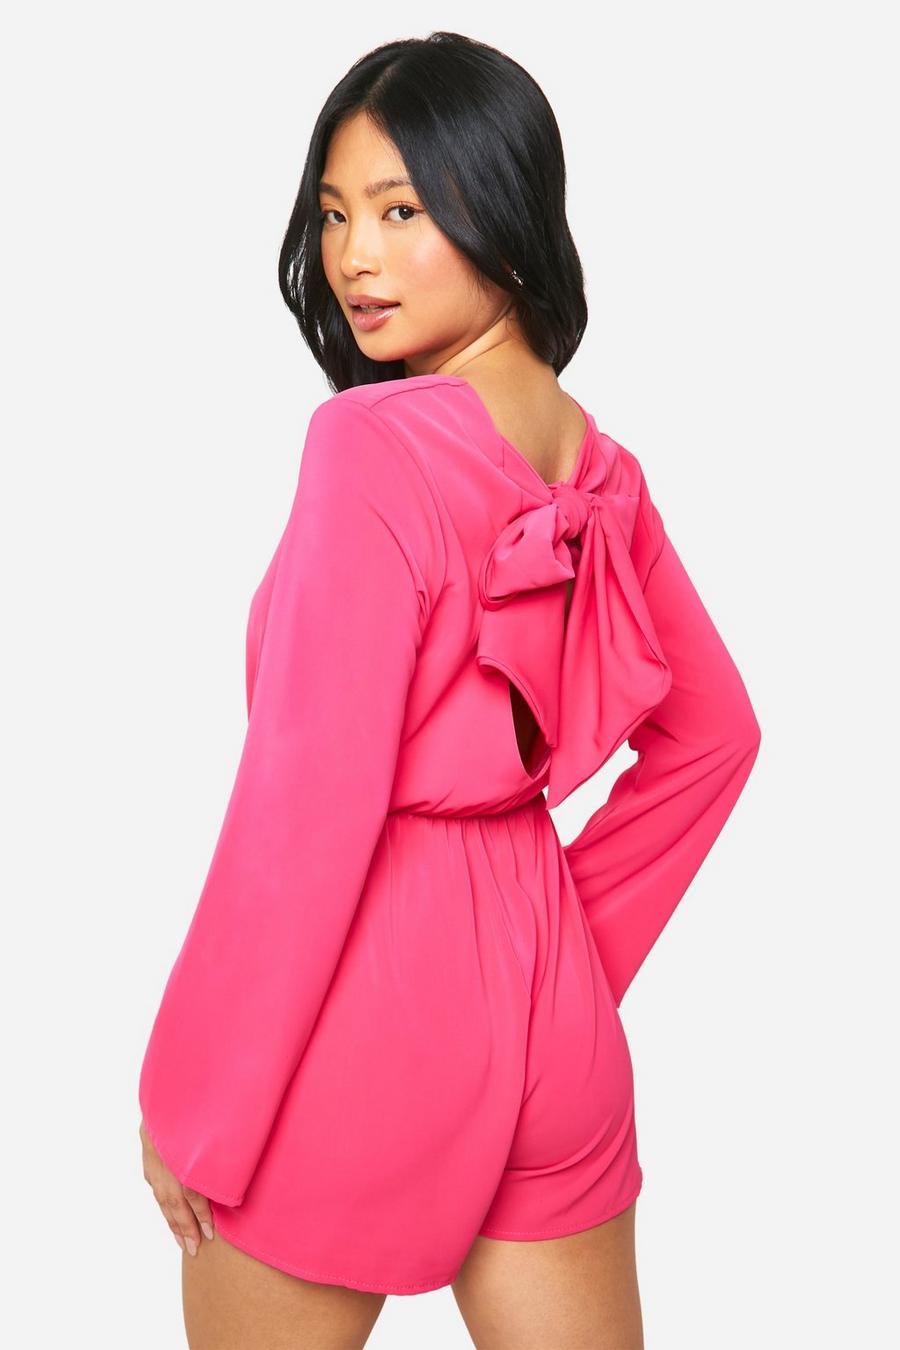 Hot pink Petite Bow Detail Open Back Romper